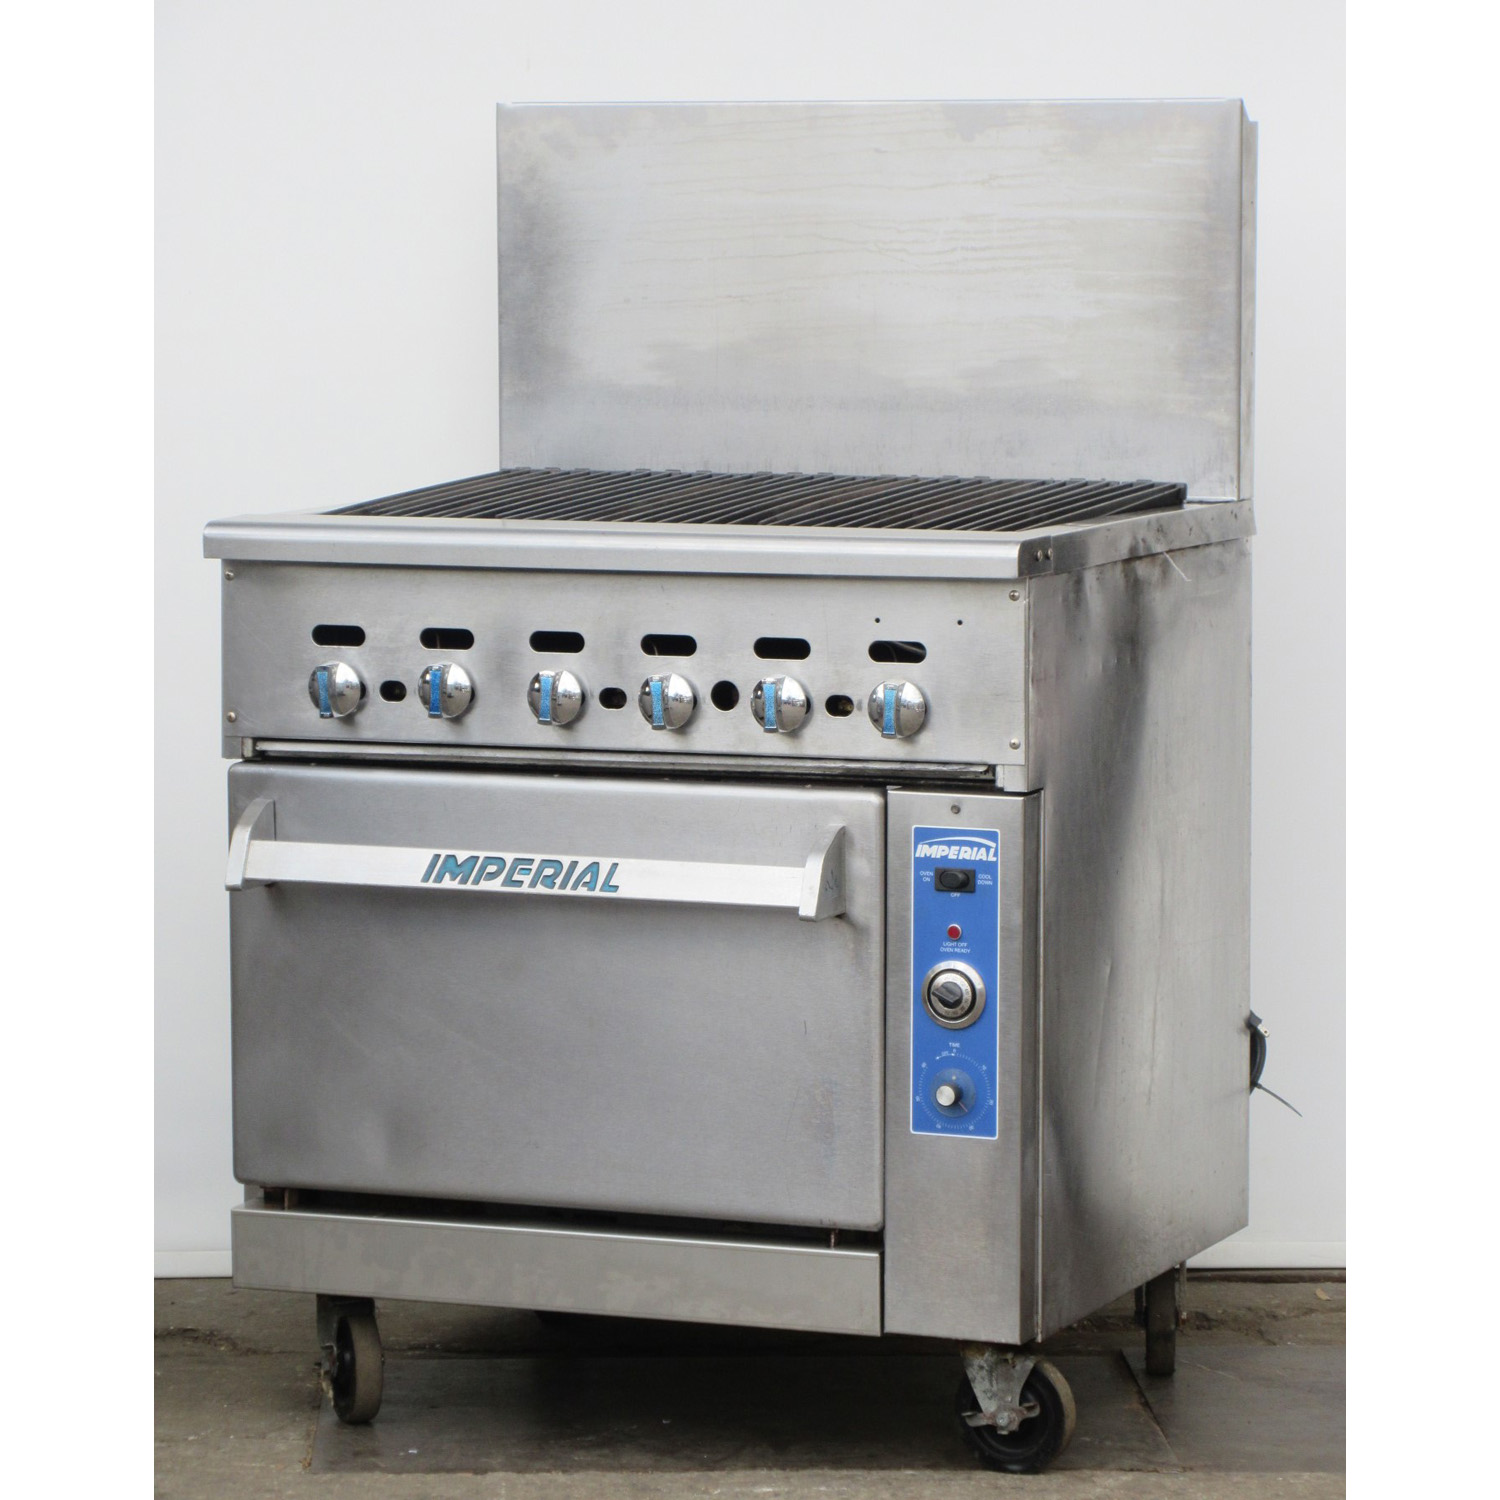 Imperial IR-36BR-C Radiant Broiler Range with Convection Oven Gas, Excellent Condition